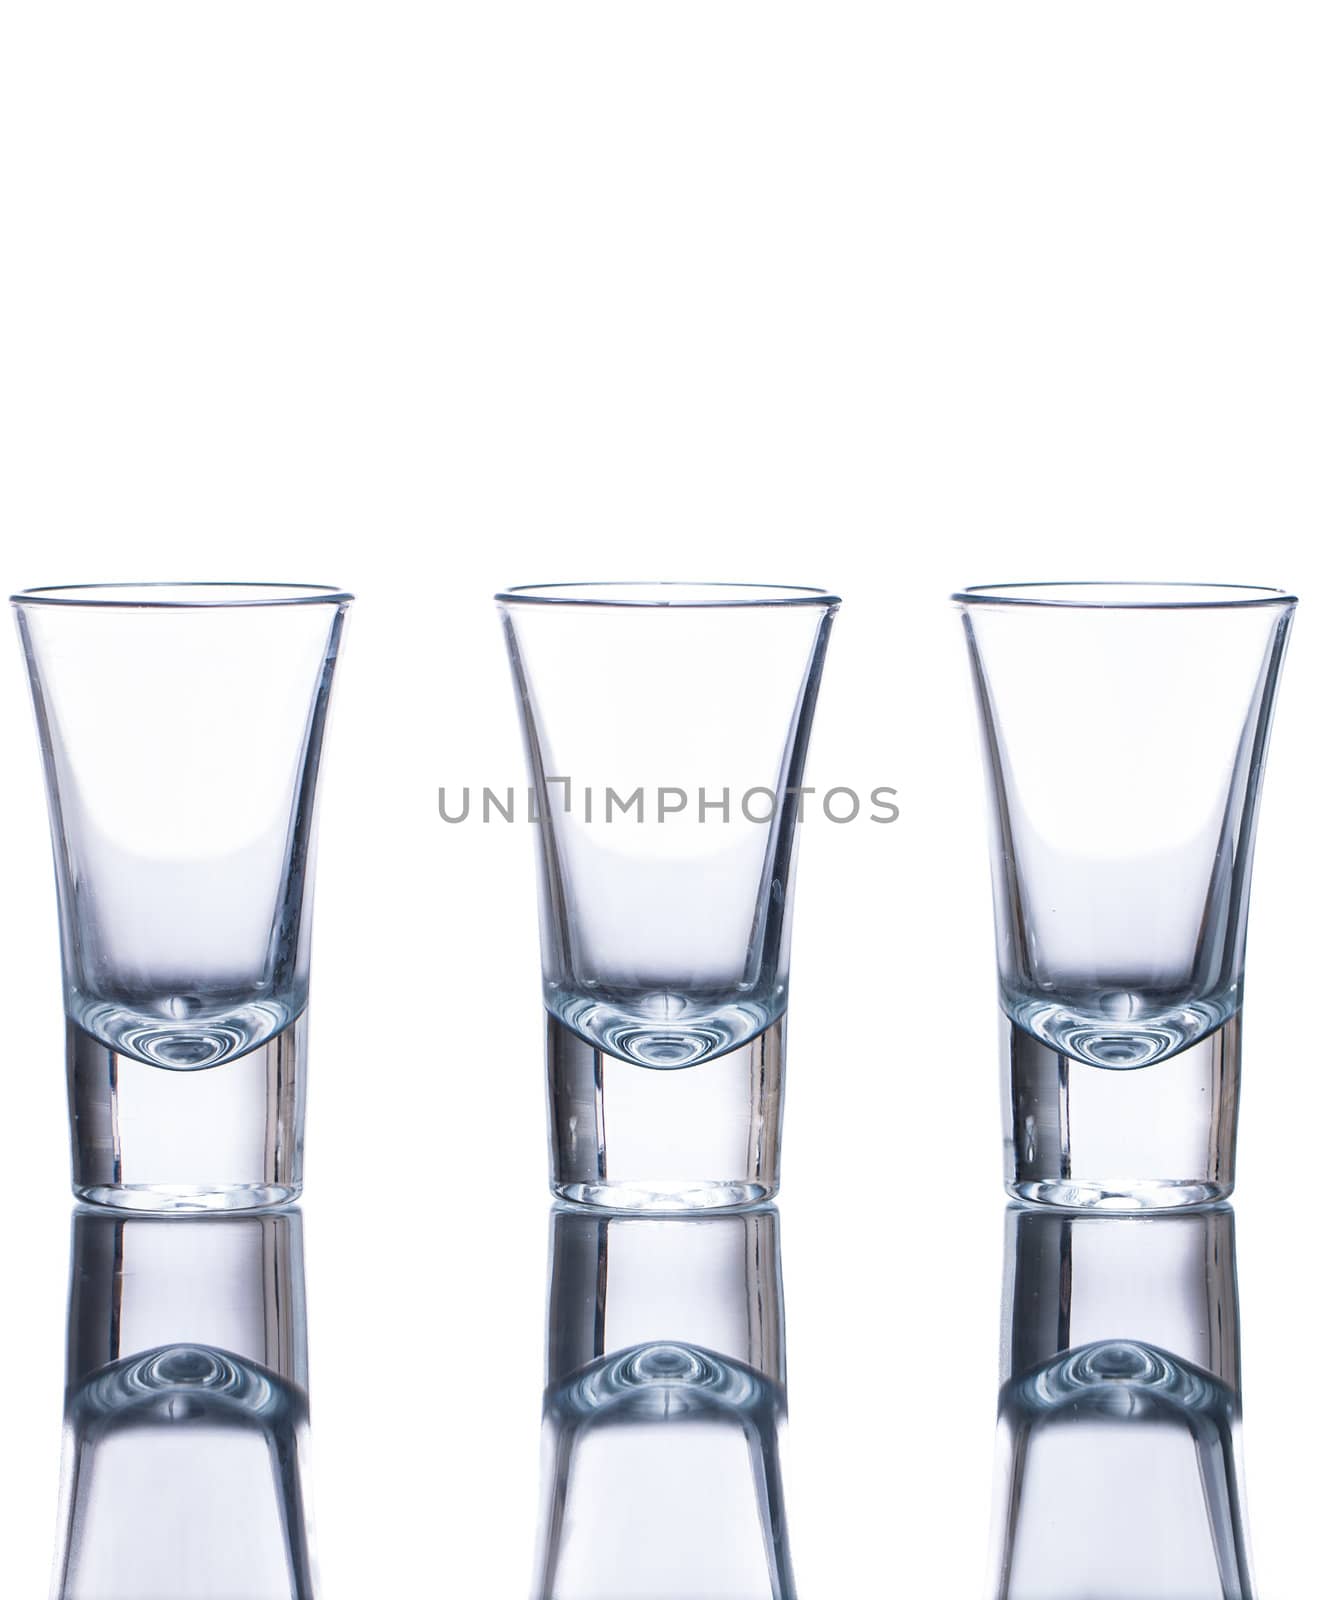 Three empty shot glasses on a reflective surface. Isolated on white.